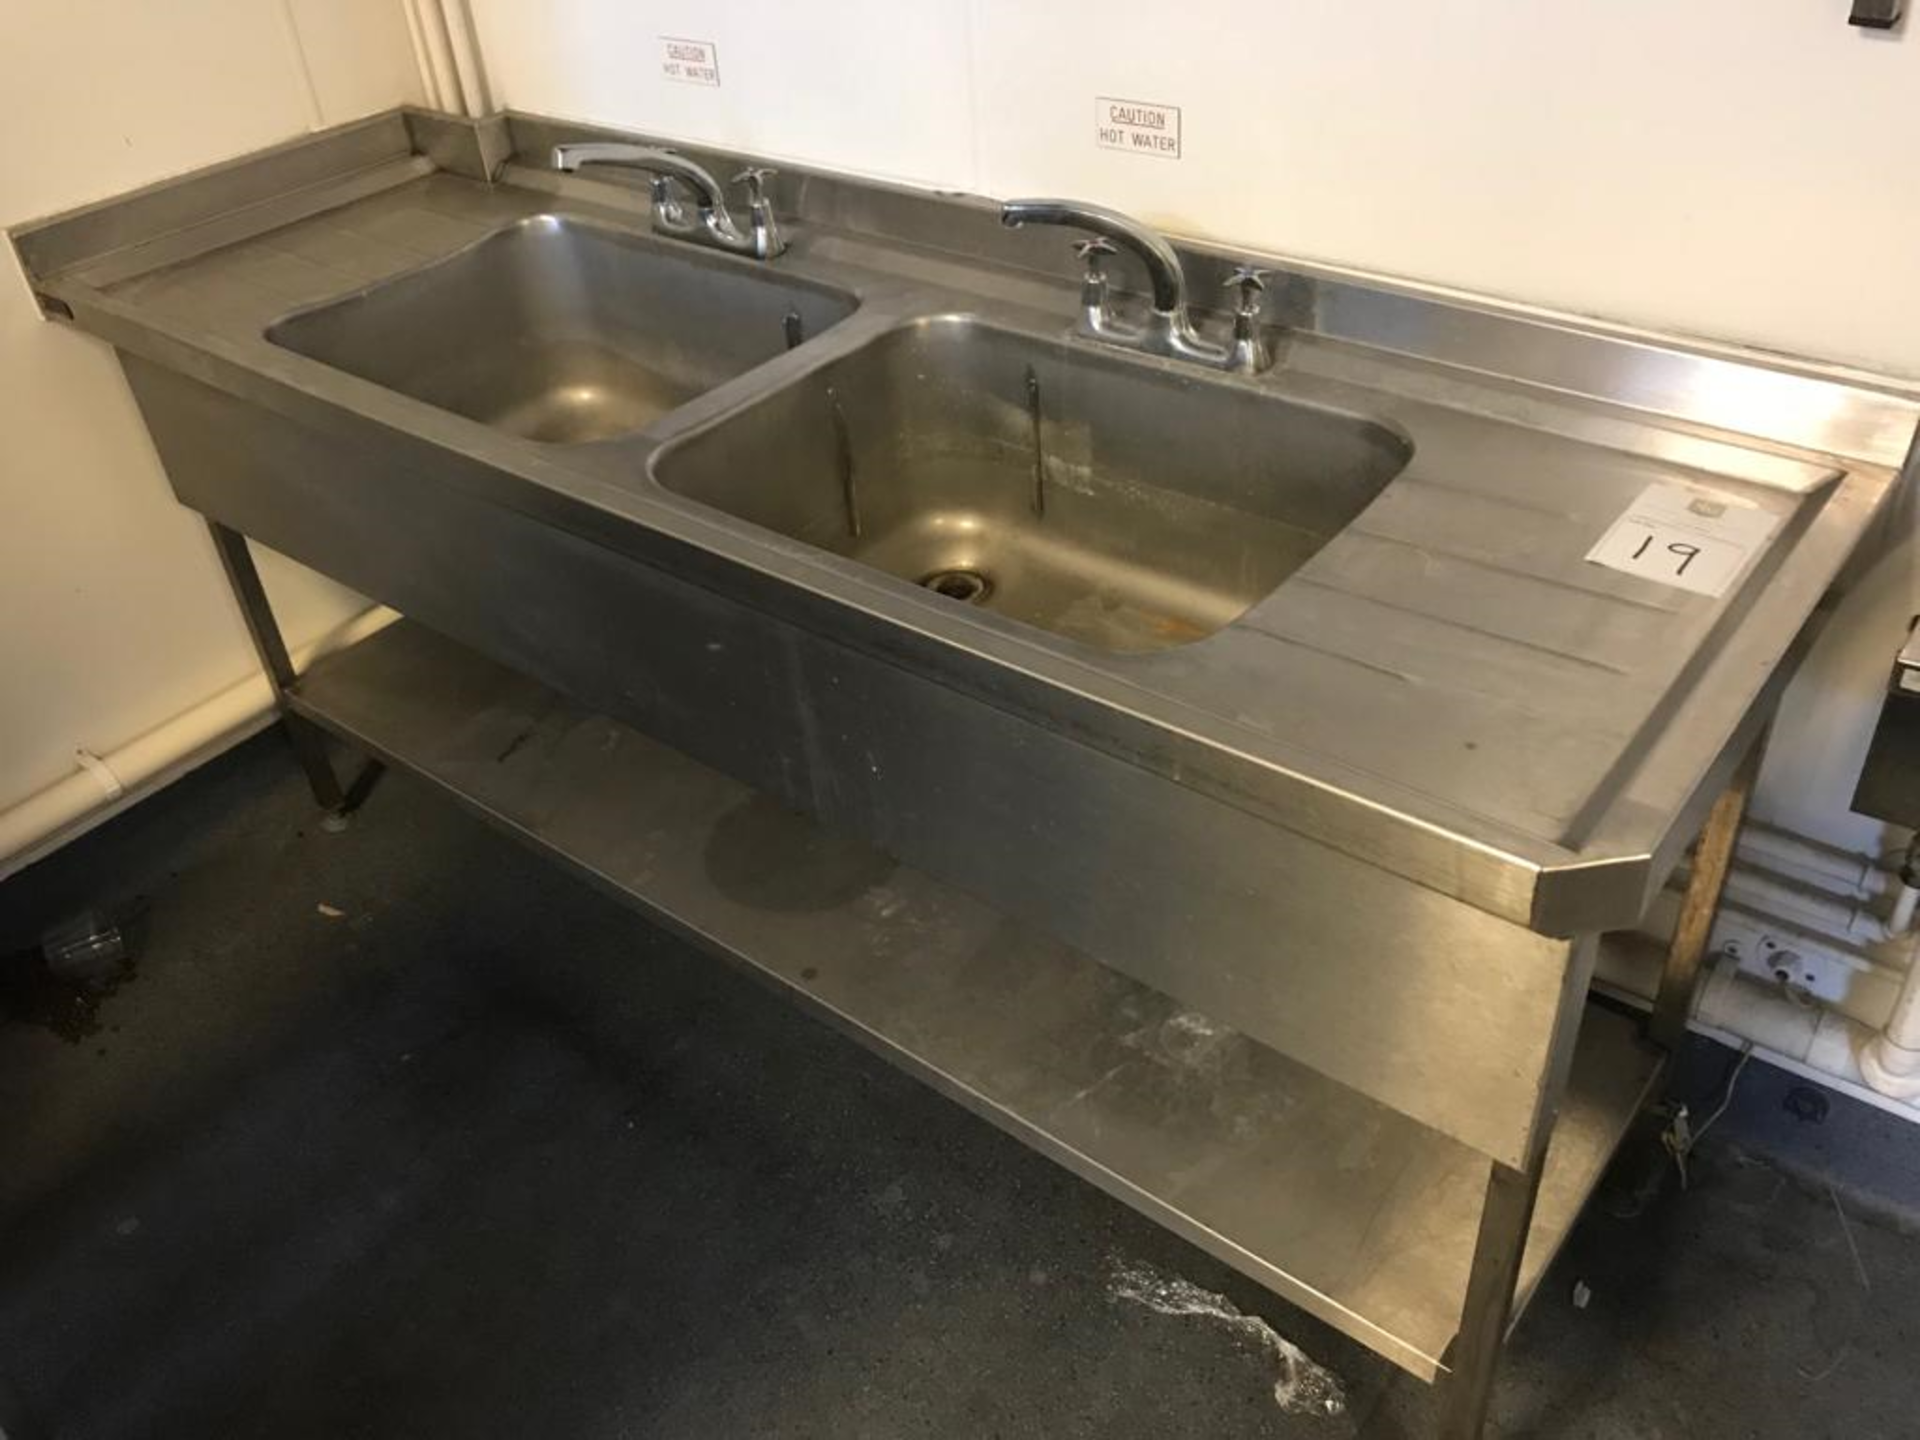 Stainless Steel Double Sink With 2 Taps, Shelf Below and 2 Wall Mounted Shelves